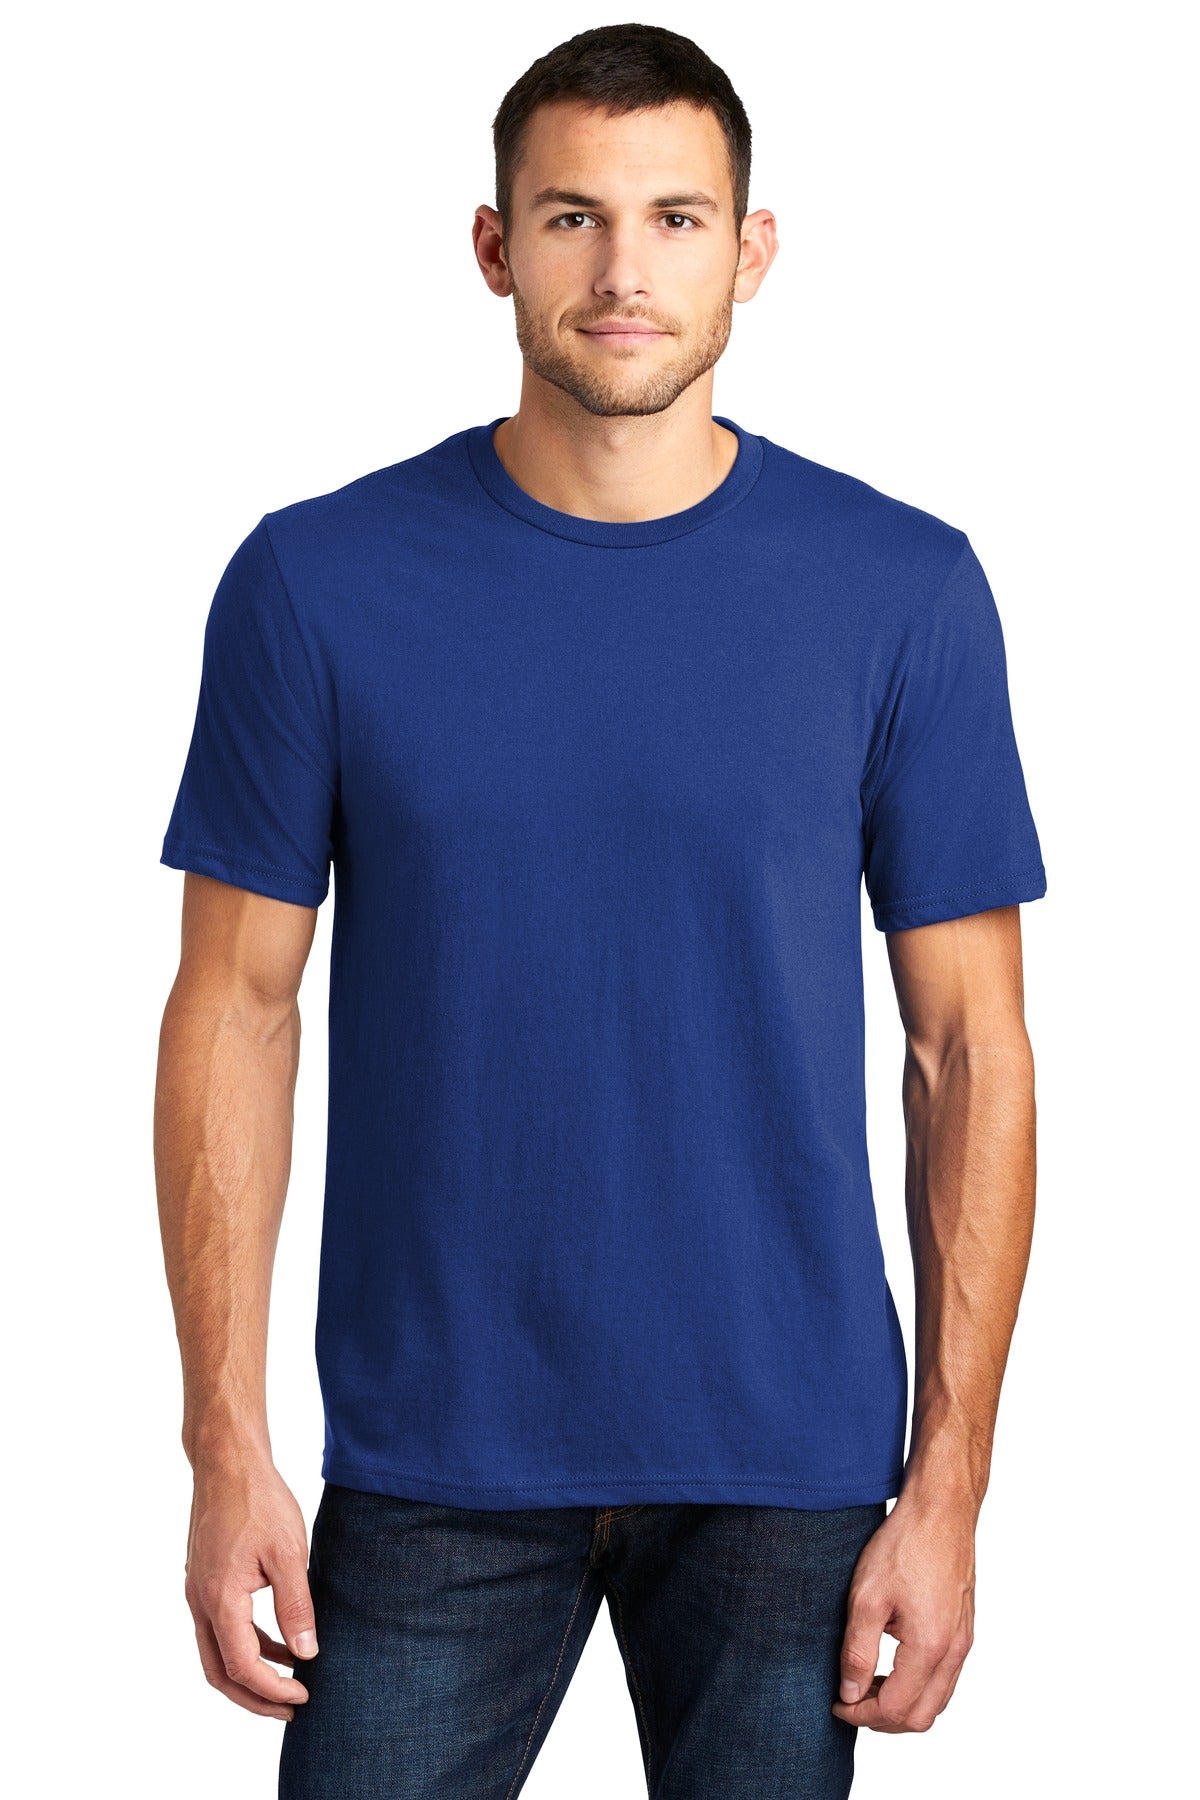 District® Very Important Tee®. DT6000 [Deep Royal] - DFW Impression